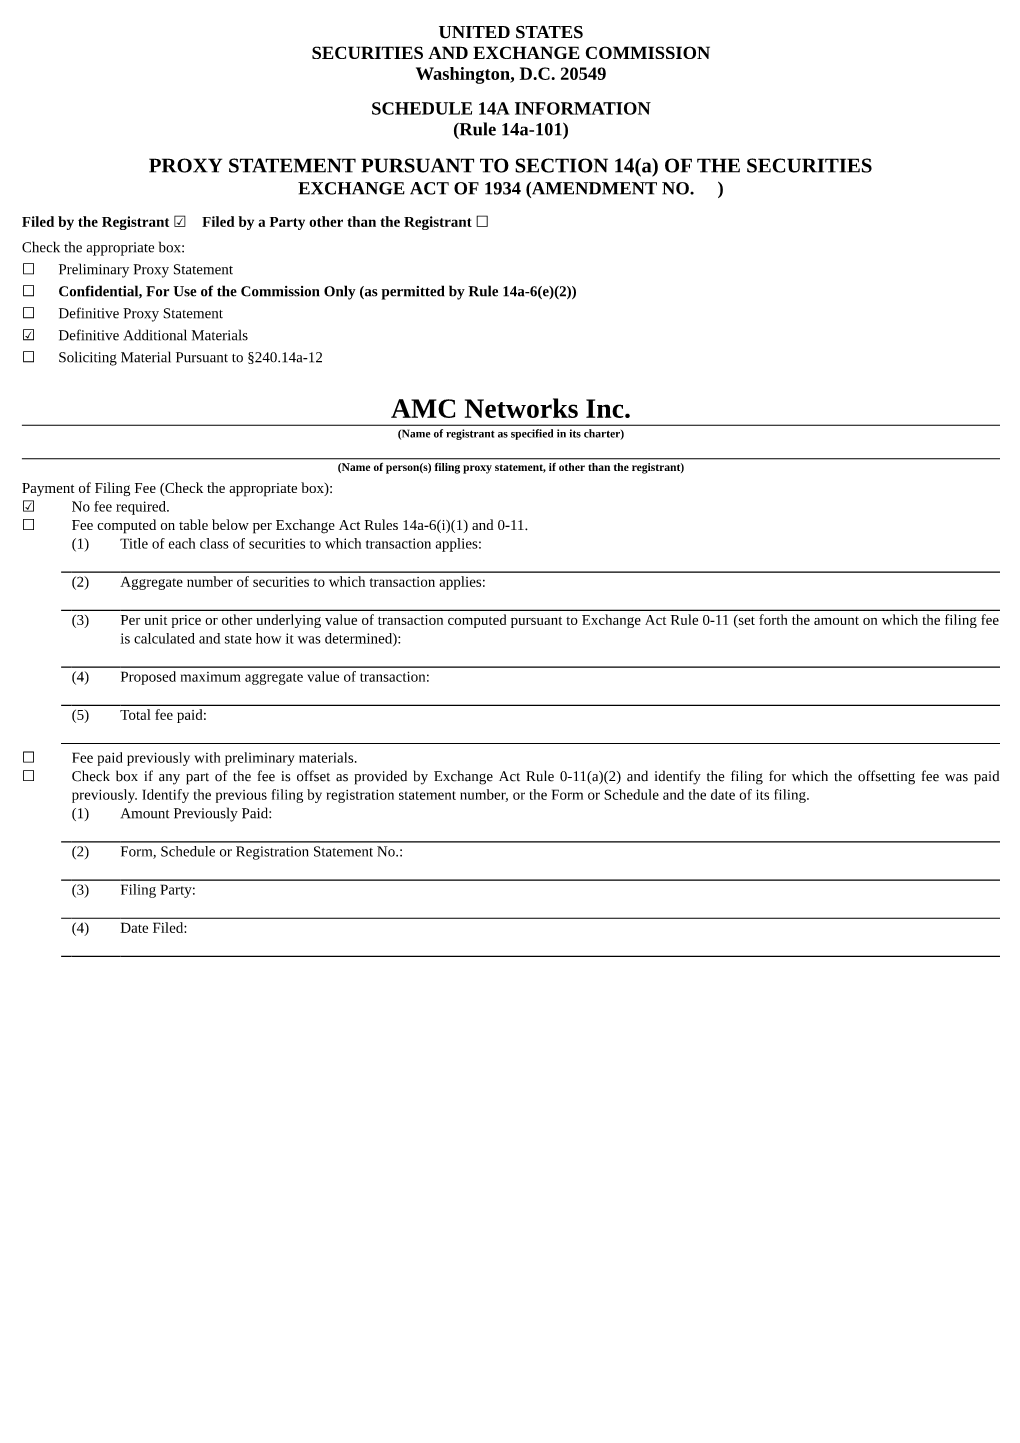 AMC Networks Inc. (Name of Registrant As Specified in Its Charter)